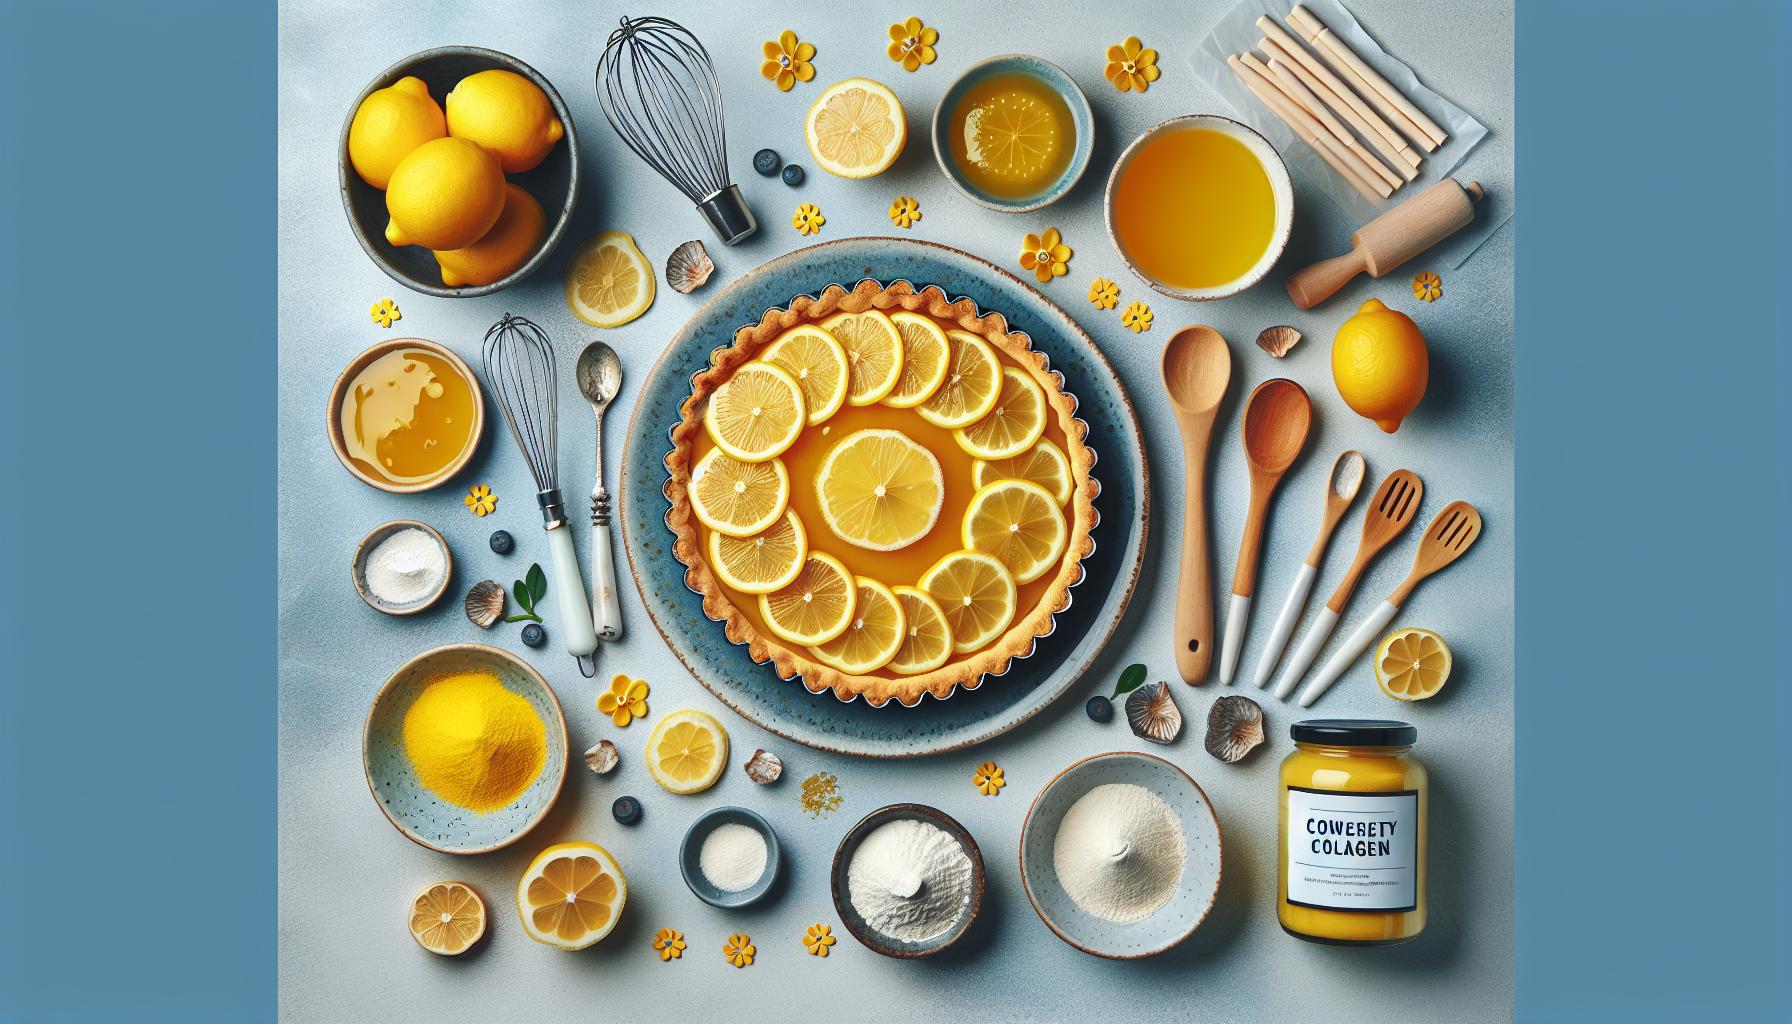 Zesty Collagen Boost: How to Make a Delicious and Nutritious Lemon Tart